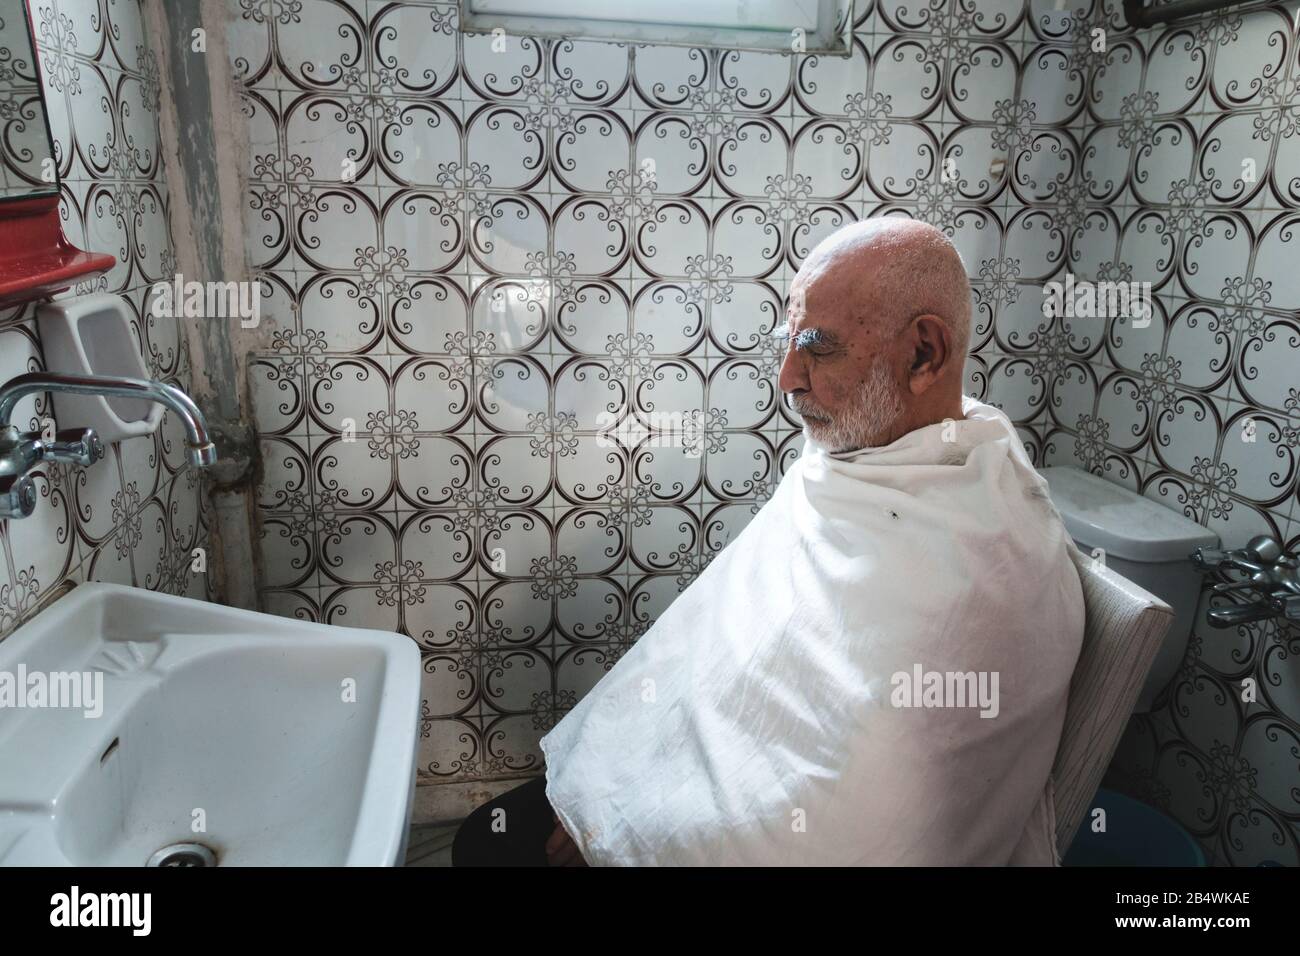 Very Old, White Haired, Bald Man waits for his Haircut In Old Vintage retro style tiled Bathroom Stock Photo